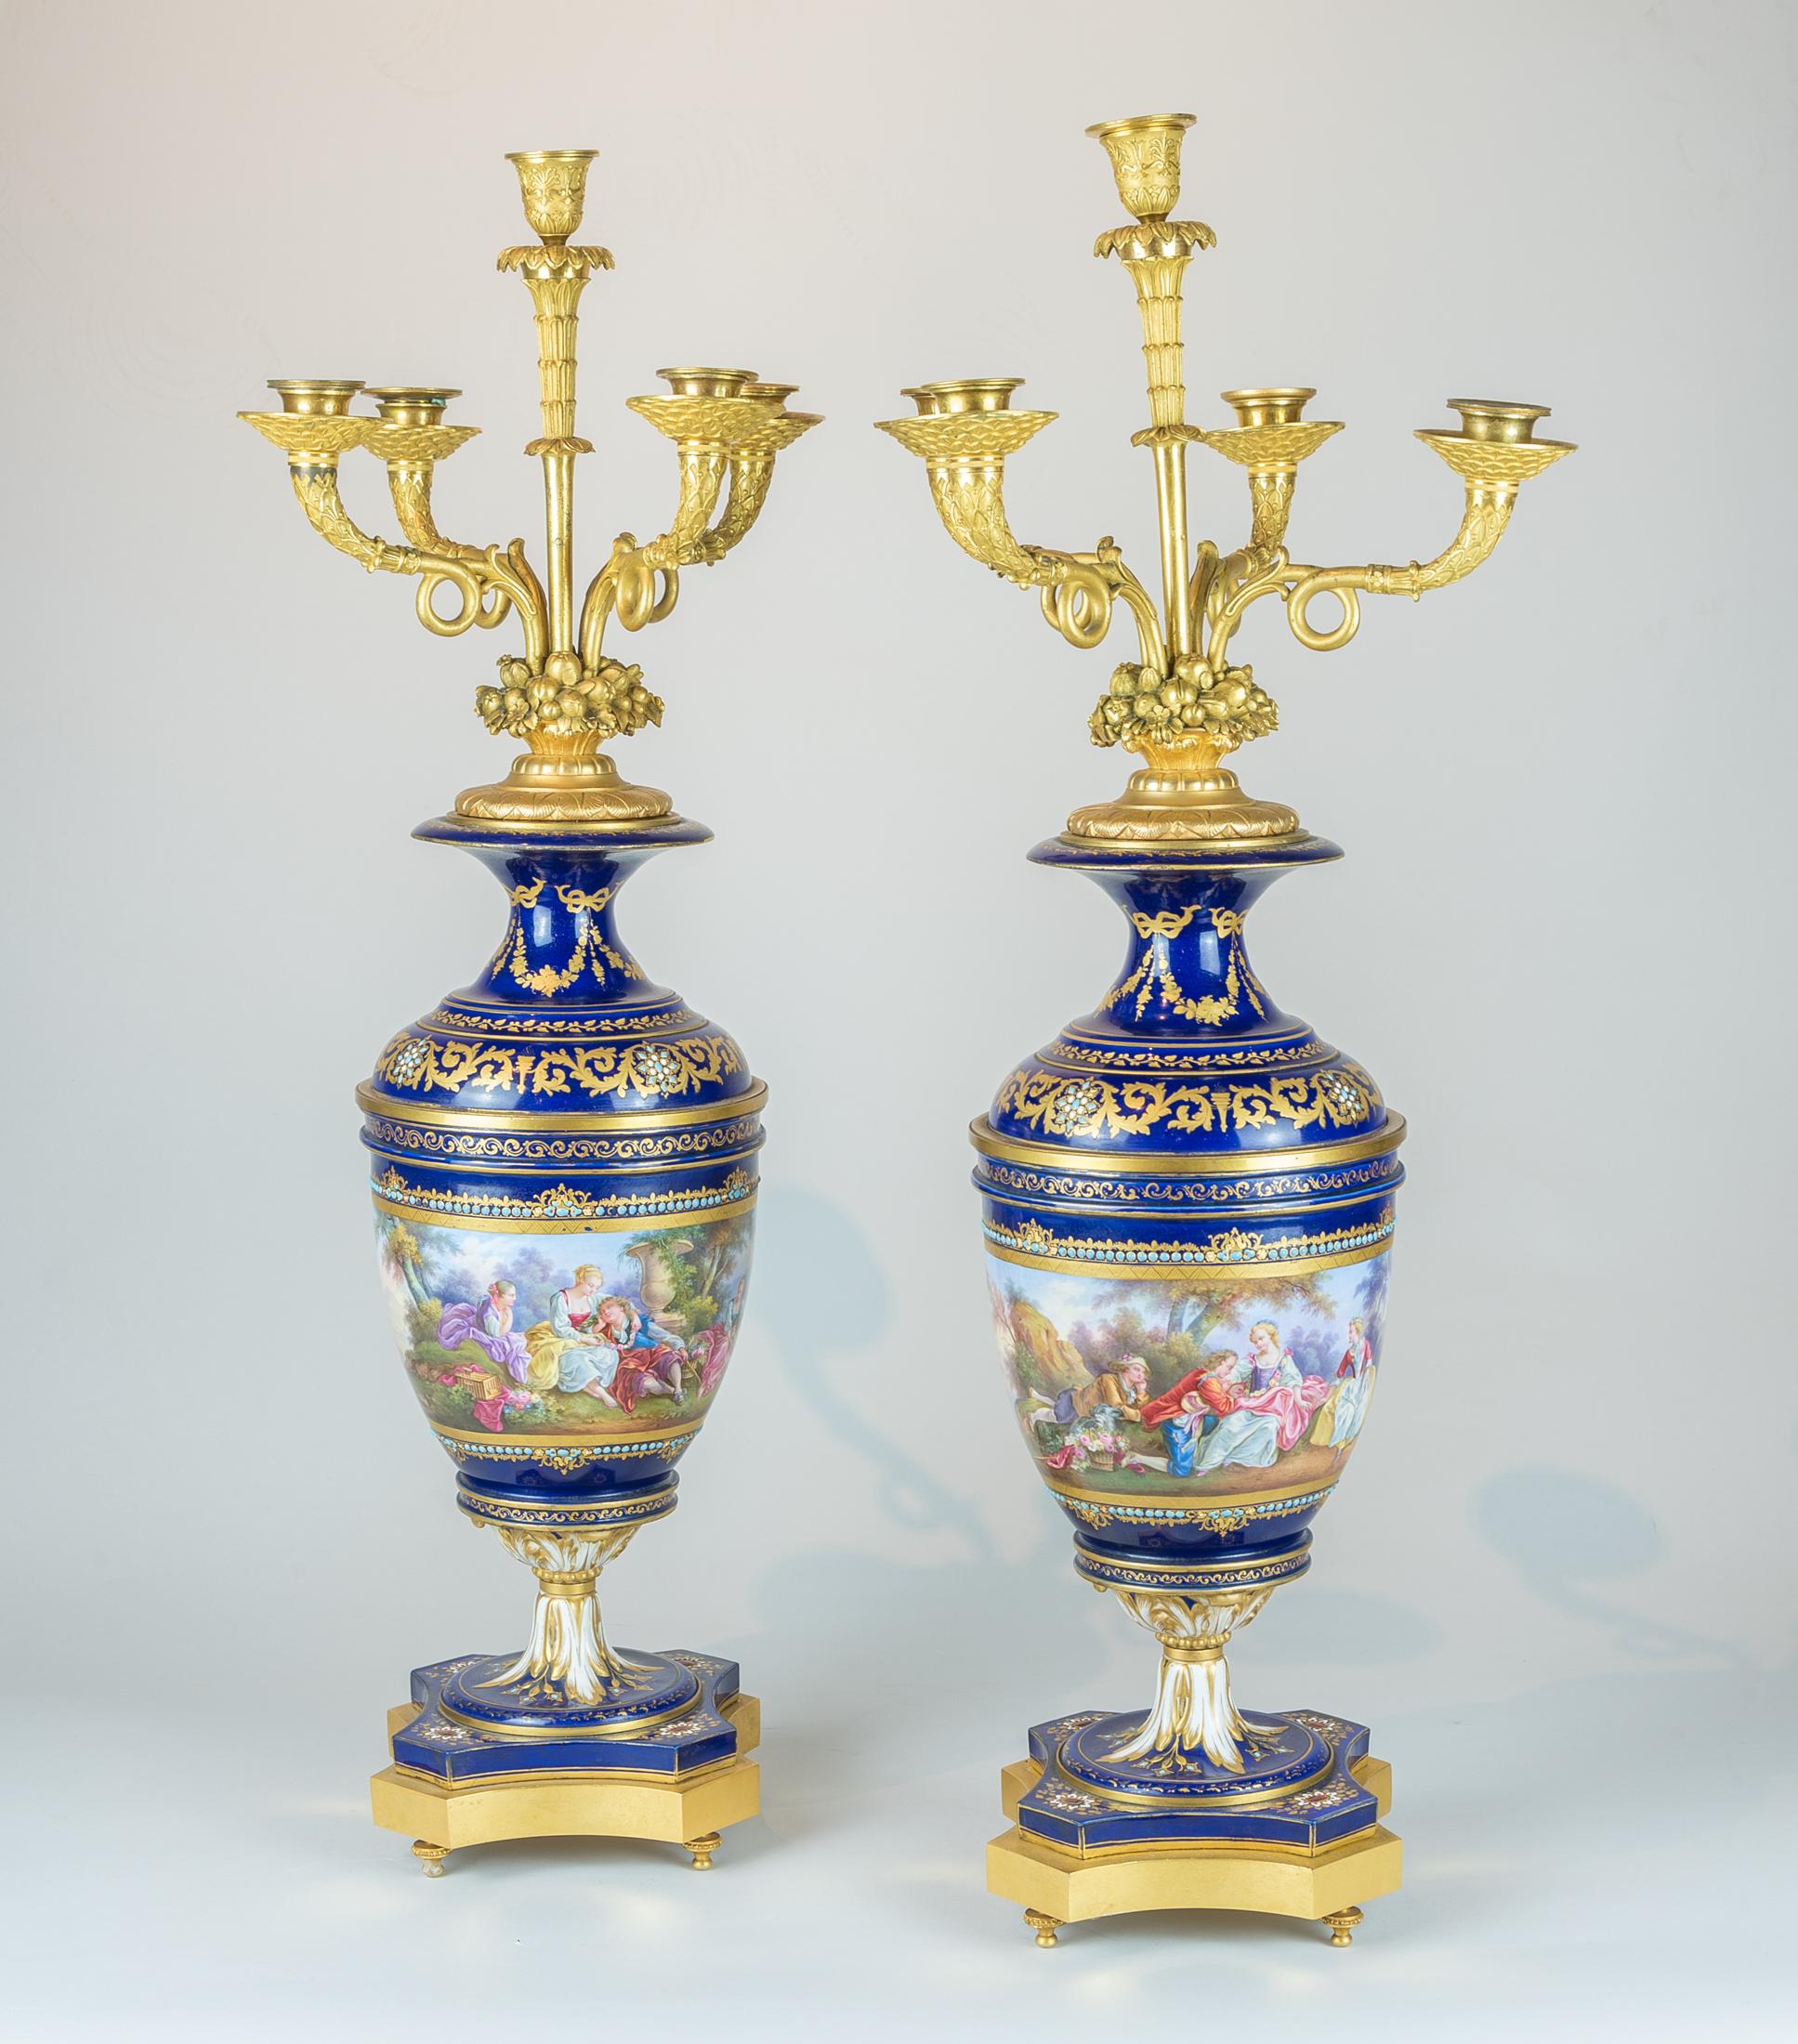 An exquisite 19th century French gilt bronze and hand painted jeweled Sevres Porcelain clock set.
Fine gilt bronze and hand painted jeweled porcelain Sevres royal blue clock set. 

Origin: French
Date: circa 1890
Dimension: Clock 28 1/2 in X 22